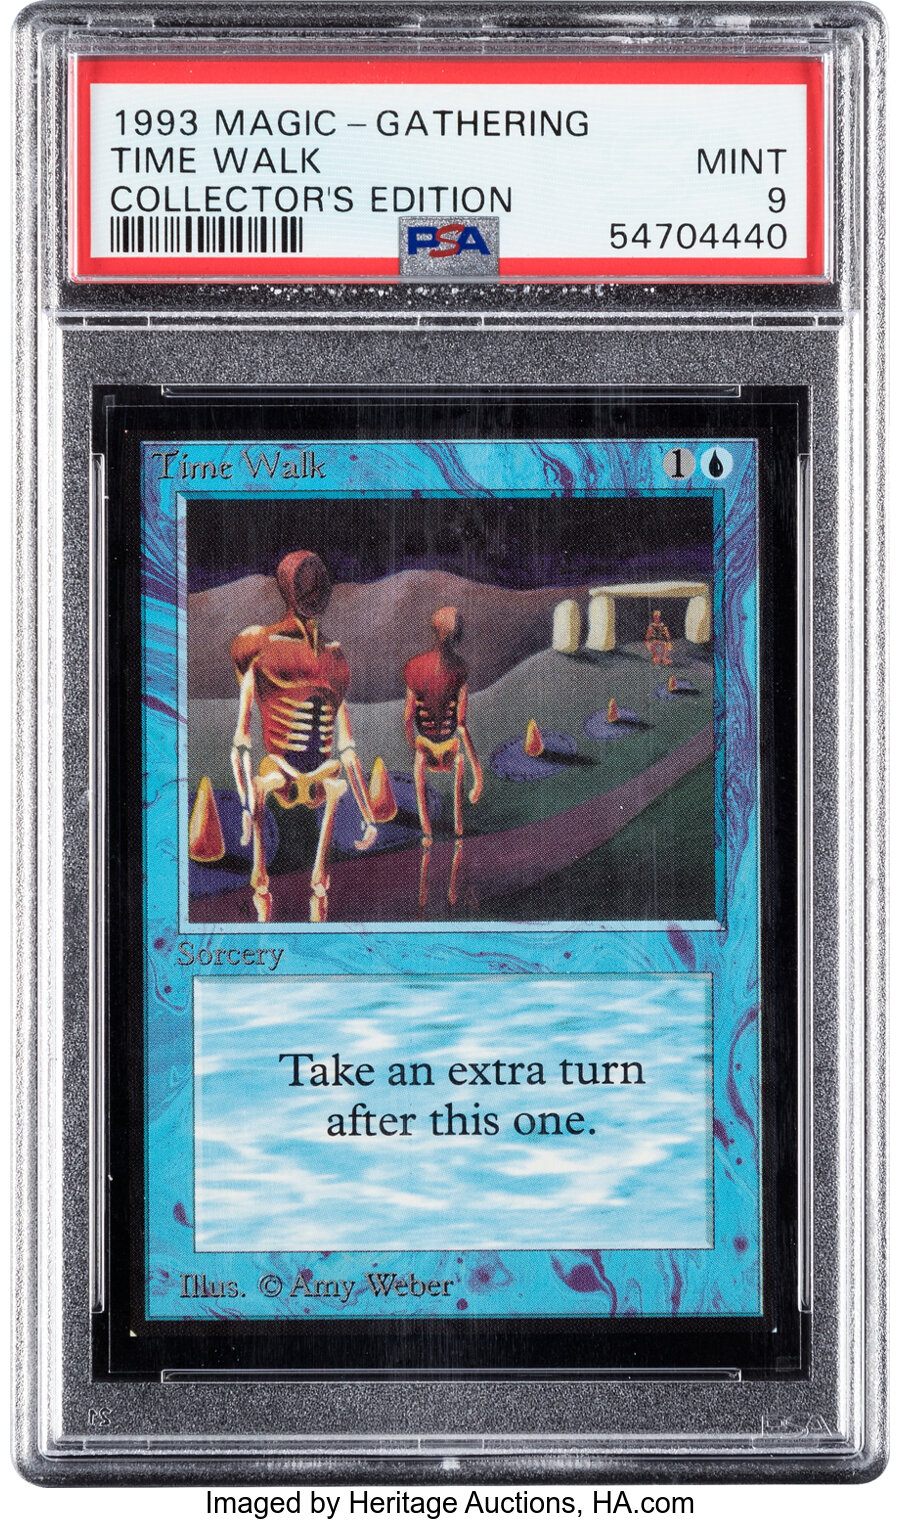 Magic: The Gathering Time Walk Collectors' Edition PSA Trading Card Game MINT 9 (Wizards of the Coast, 1993) Rare